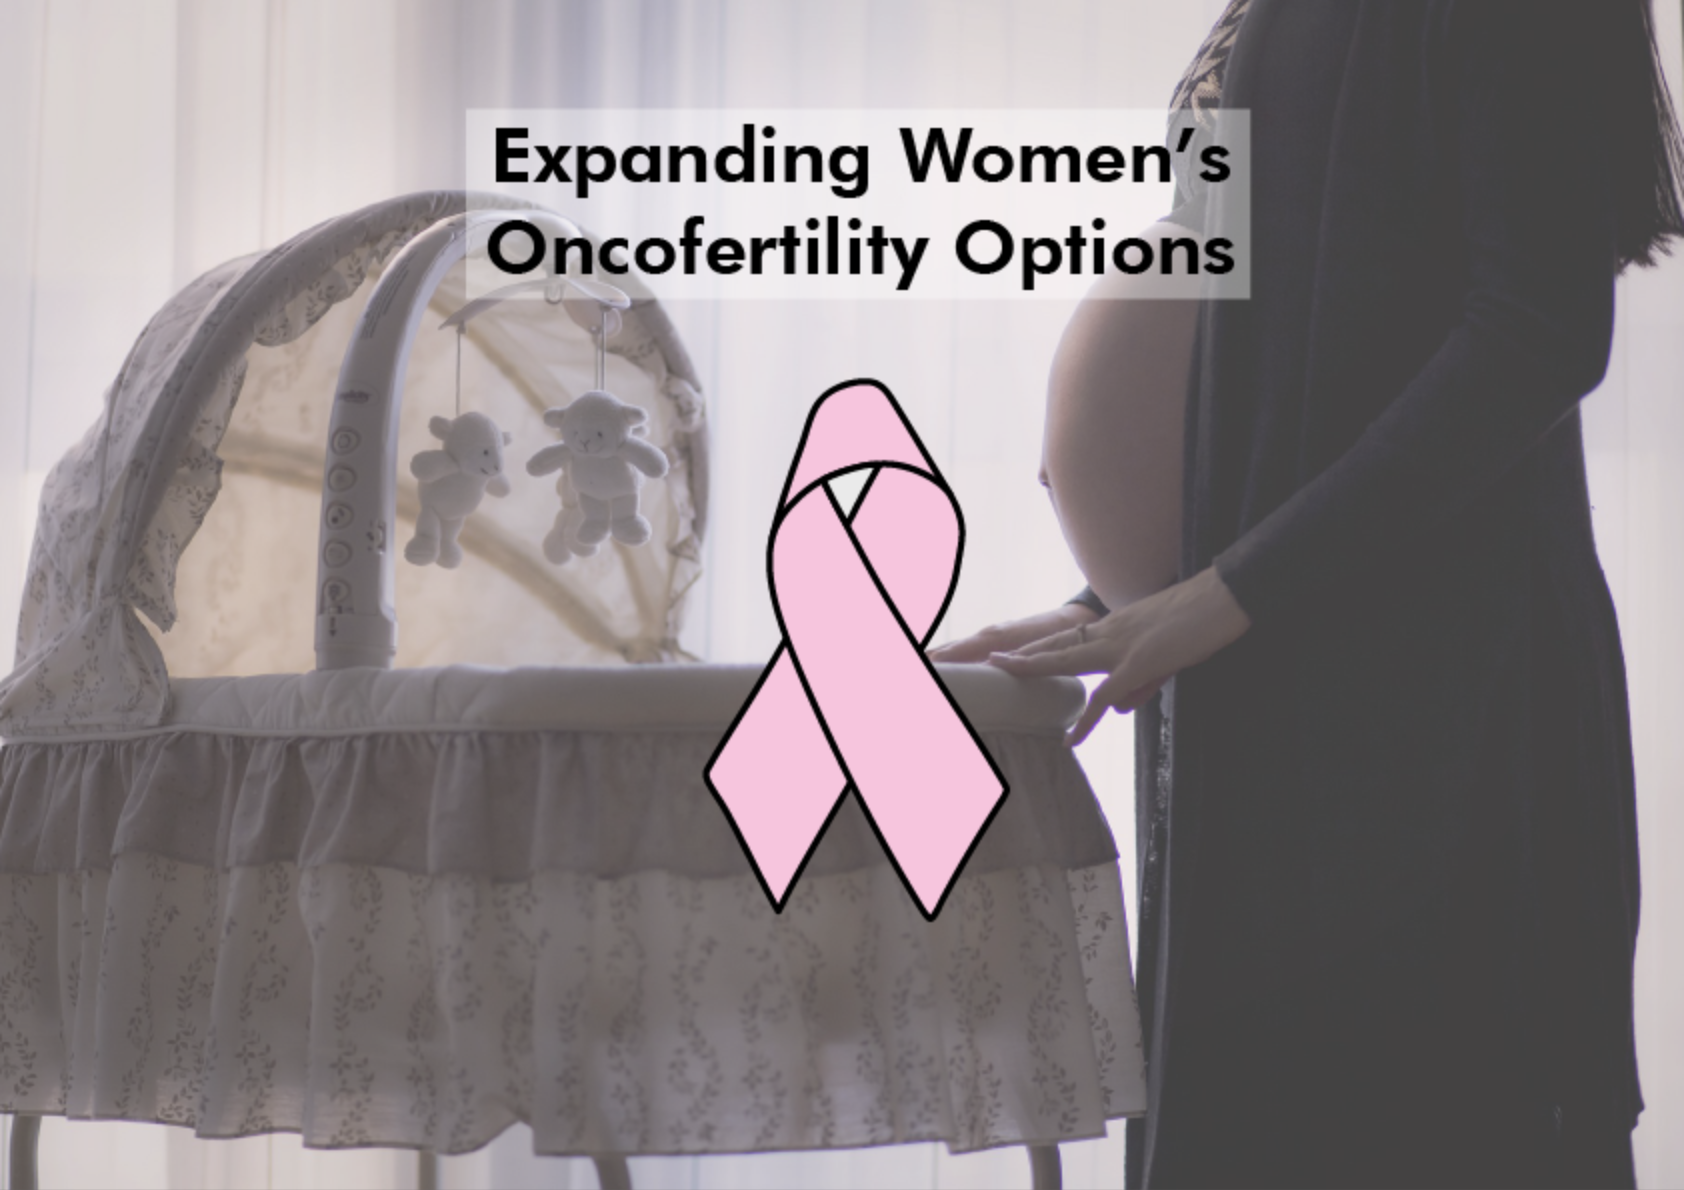 Prospects and Potential for Expanding Women’s Oncofertility Options